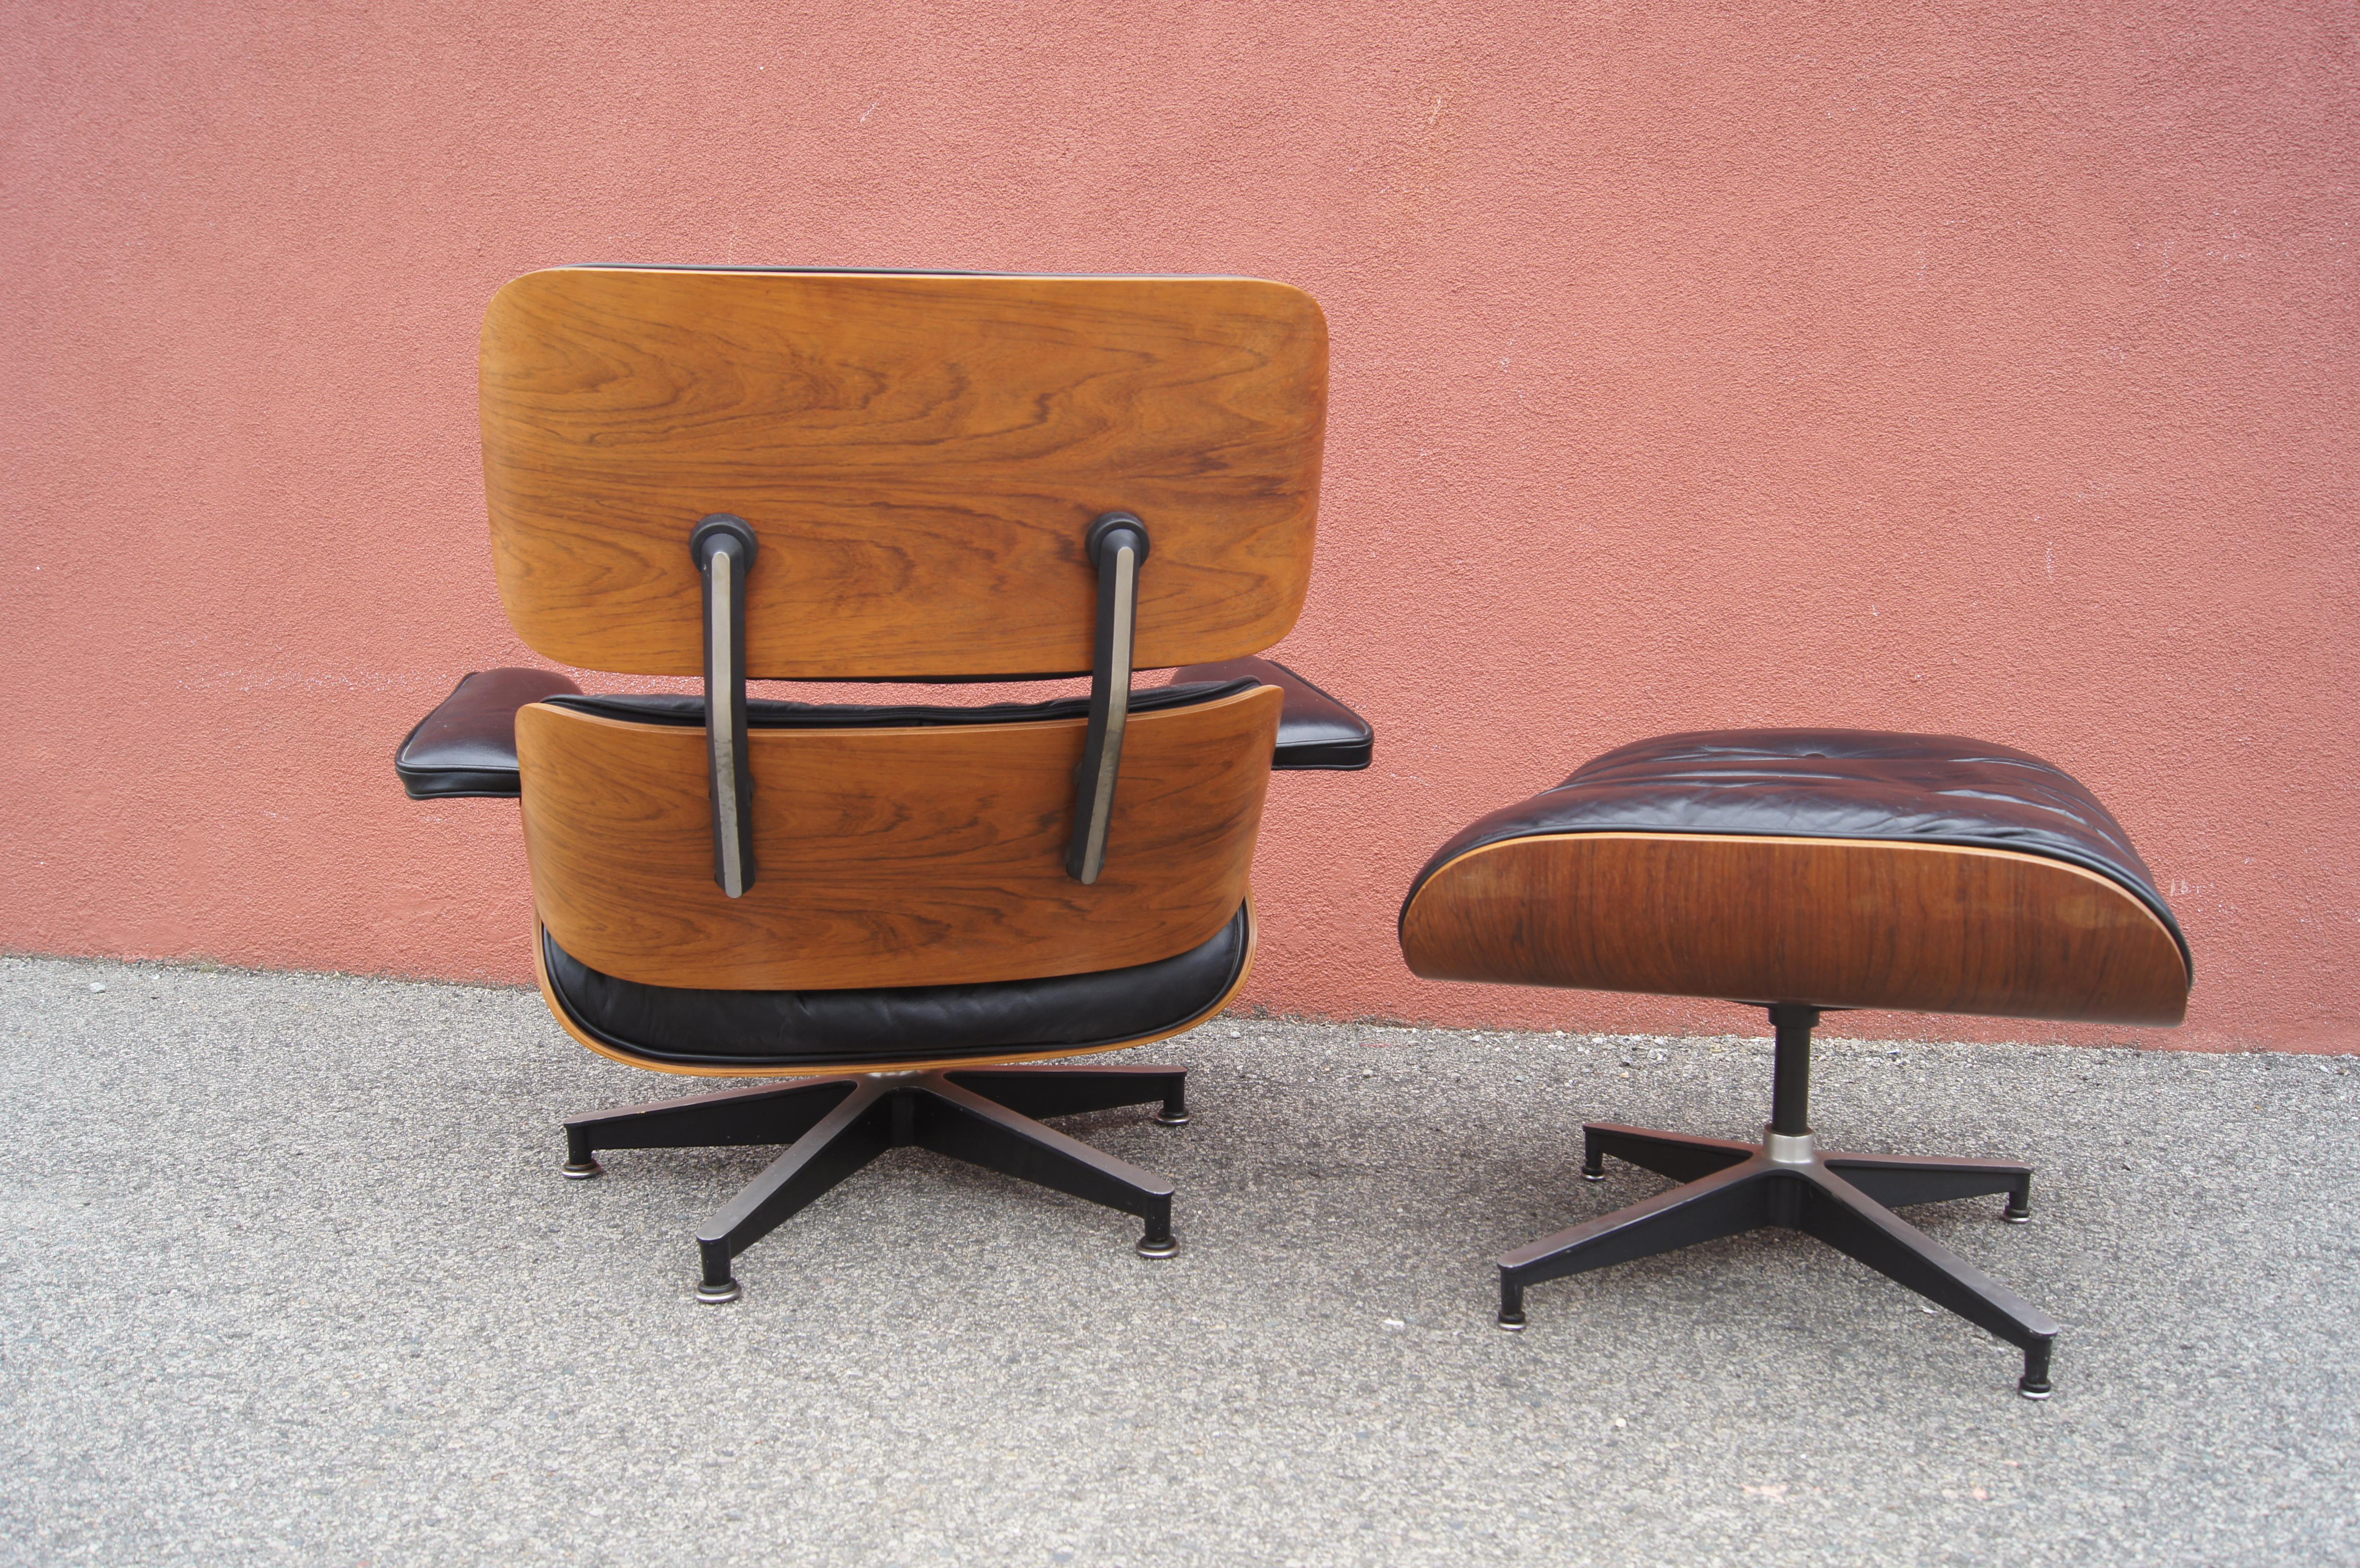 Charles and Ray Eames's classic lounge chair and ottoman for Herman Miller, models 670 and 671, exemplify deep comfort. A shell of molded rosewood veneer rests on a base of black enameled aluminum; the original down-filled cushions are upholstered